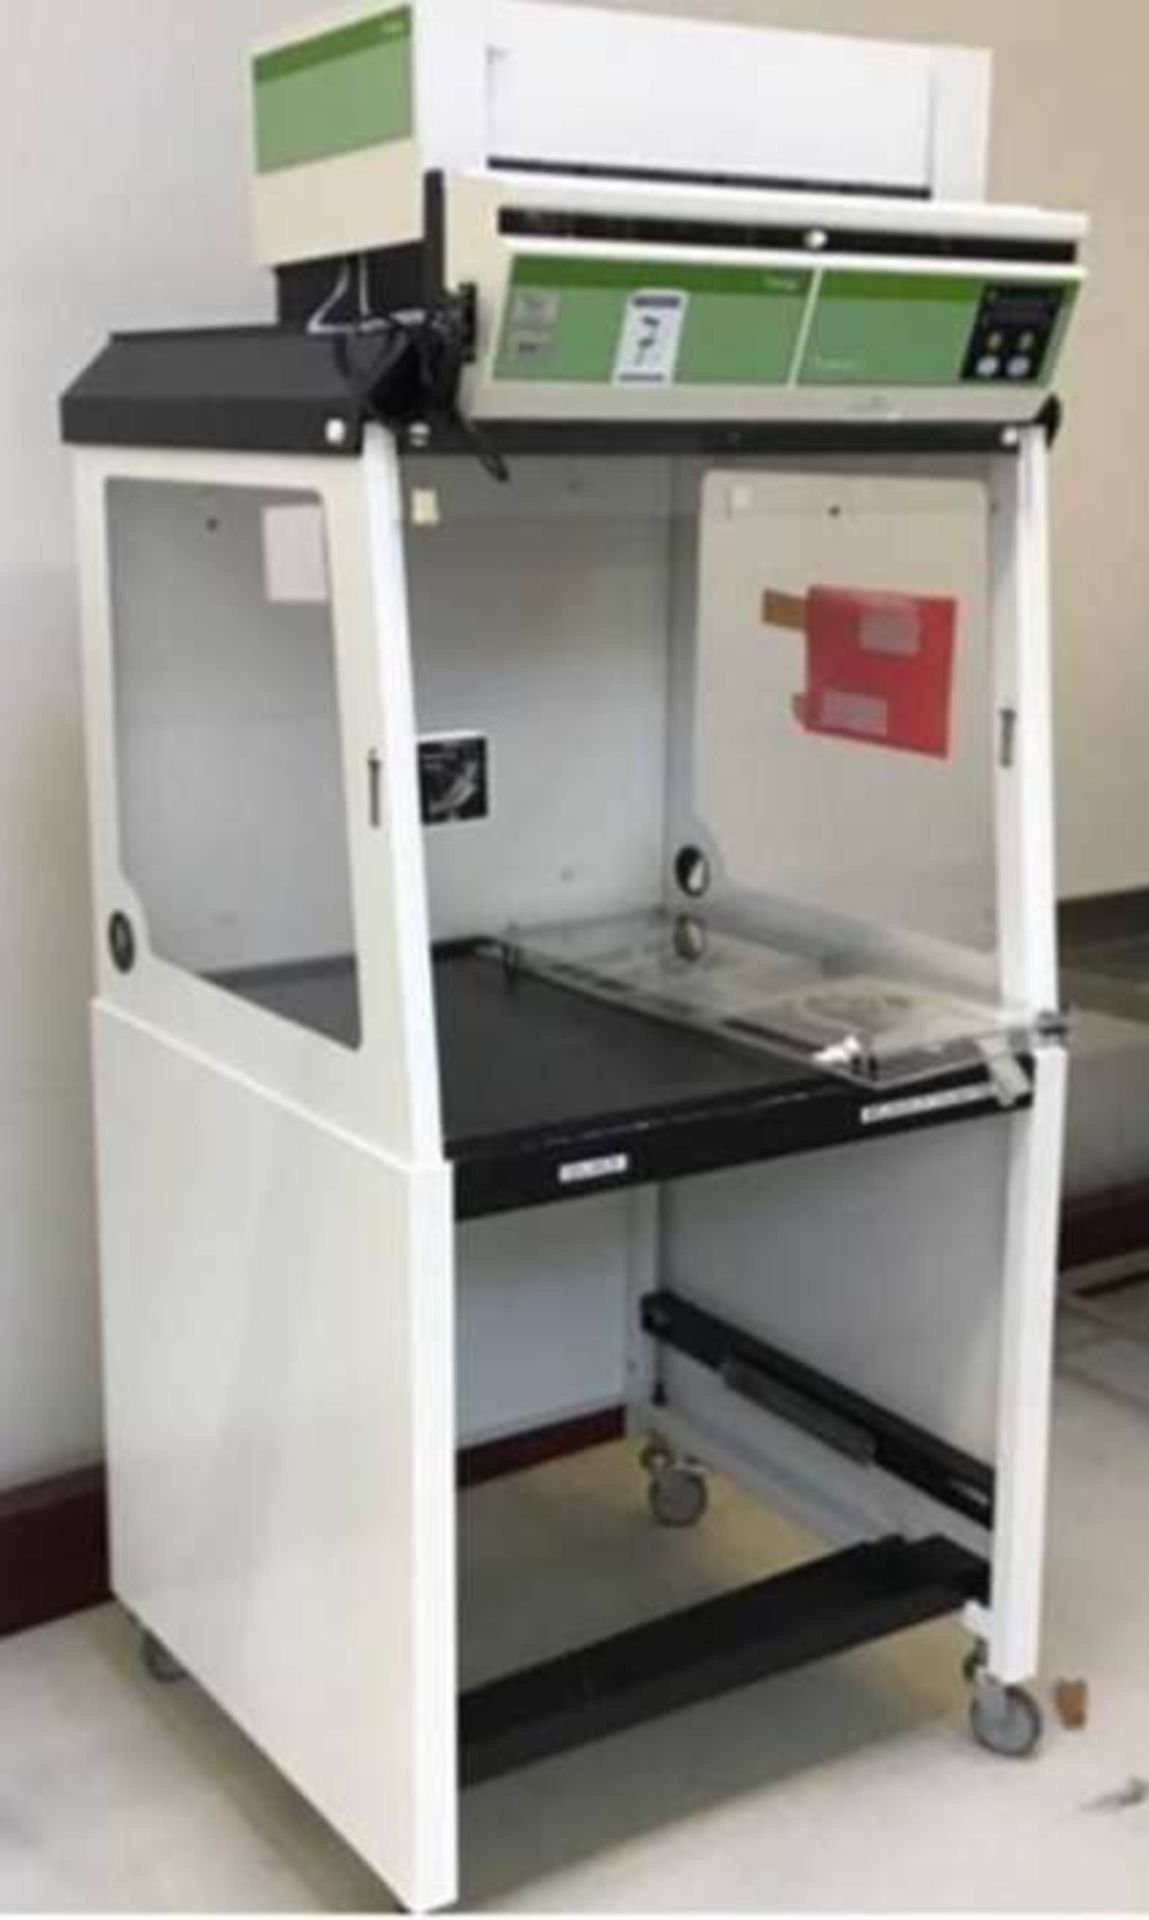 Erlab XL391 ductless fume hood for laboratory filtration